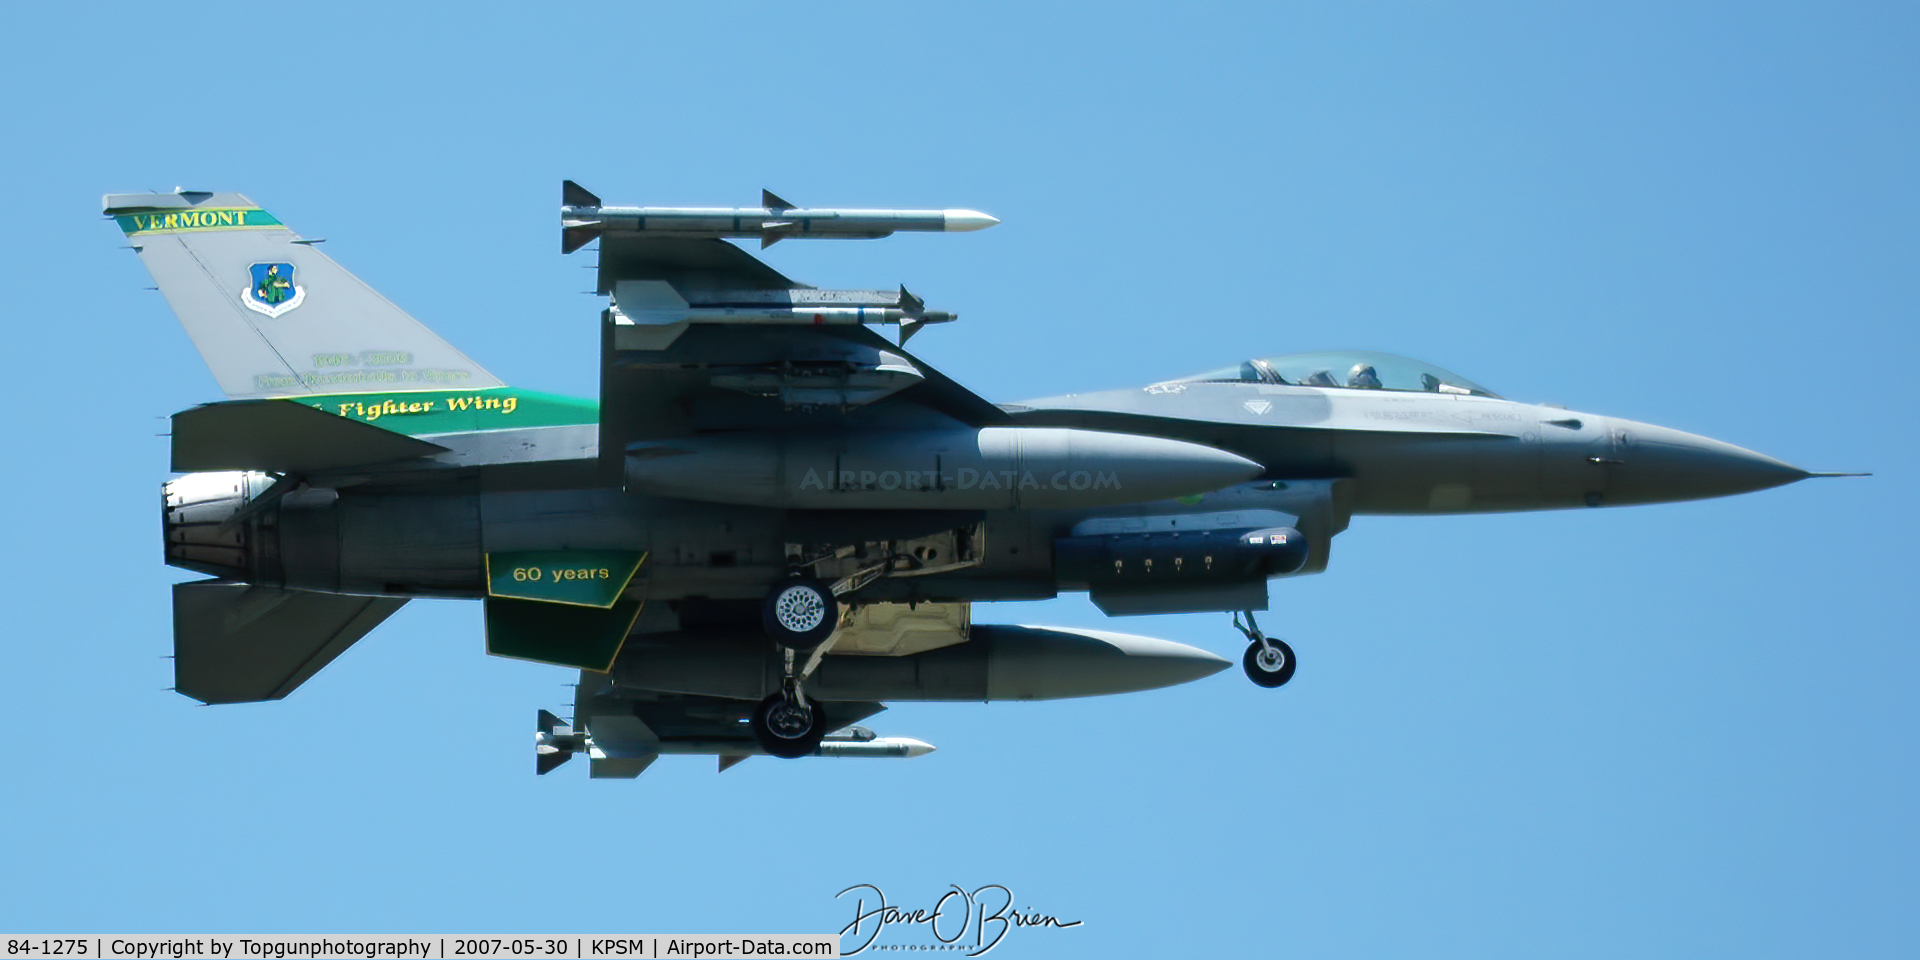 84-1275, 1984 General Dynamics F-16C Fighting Falcon C/N 5C-112, 158th FW Jet with 60th Anniversary paint scheme